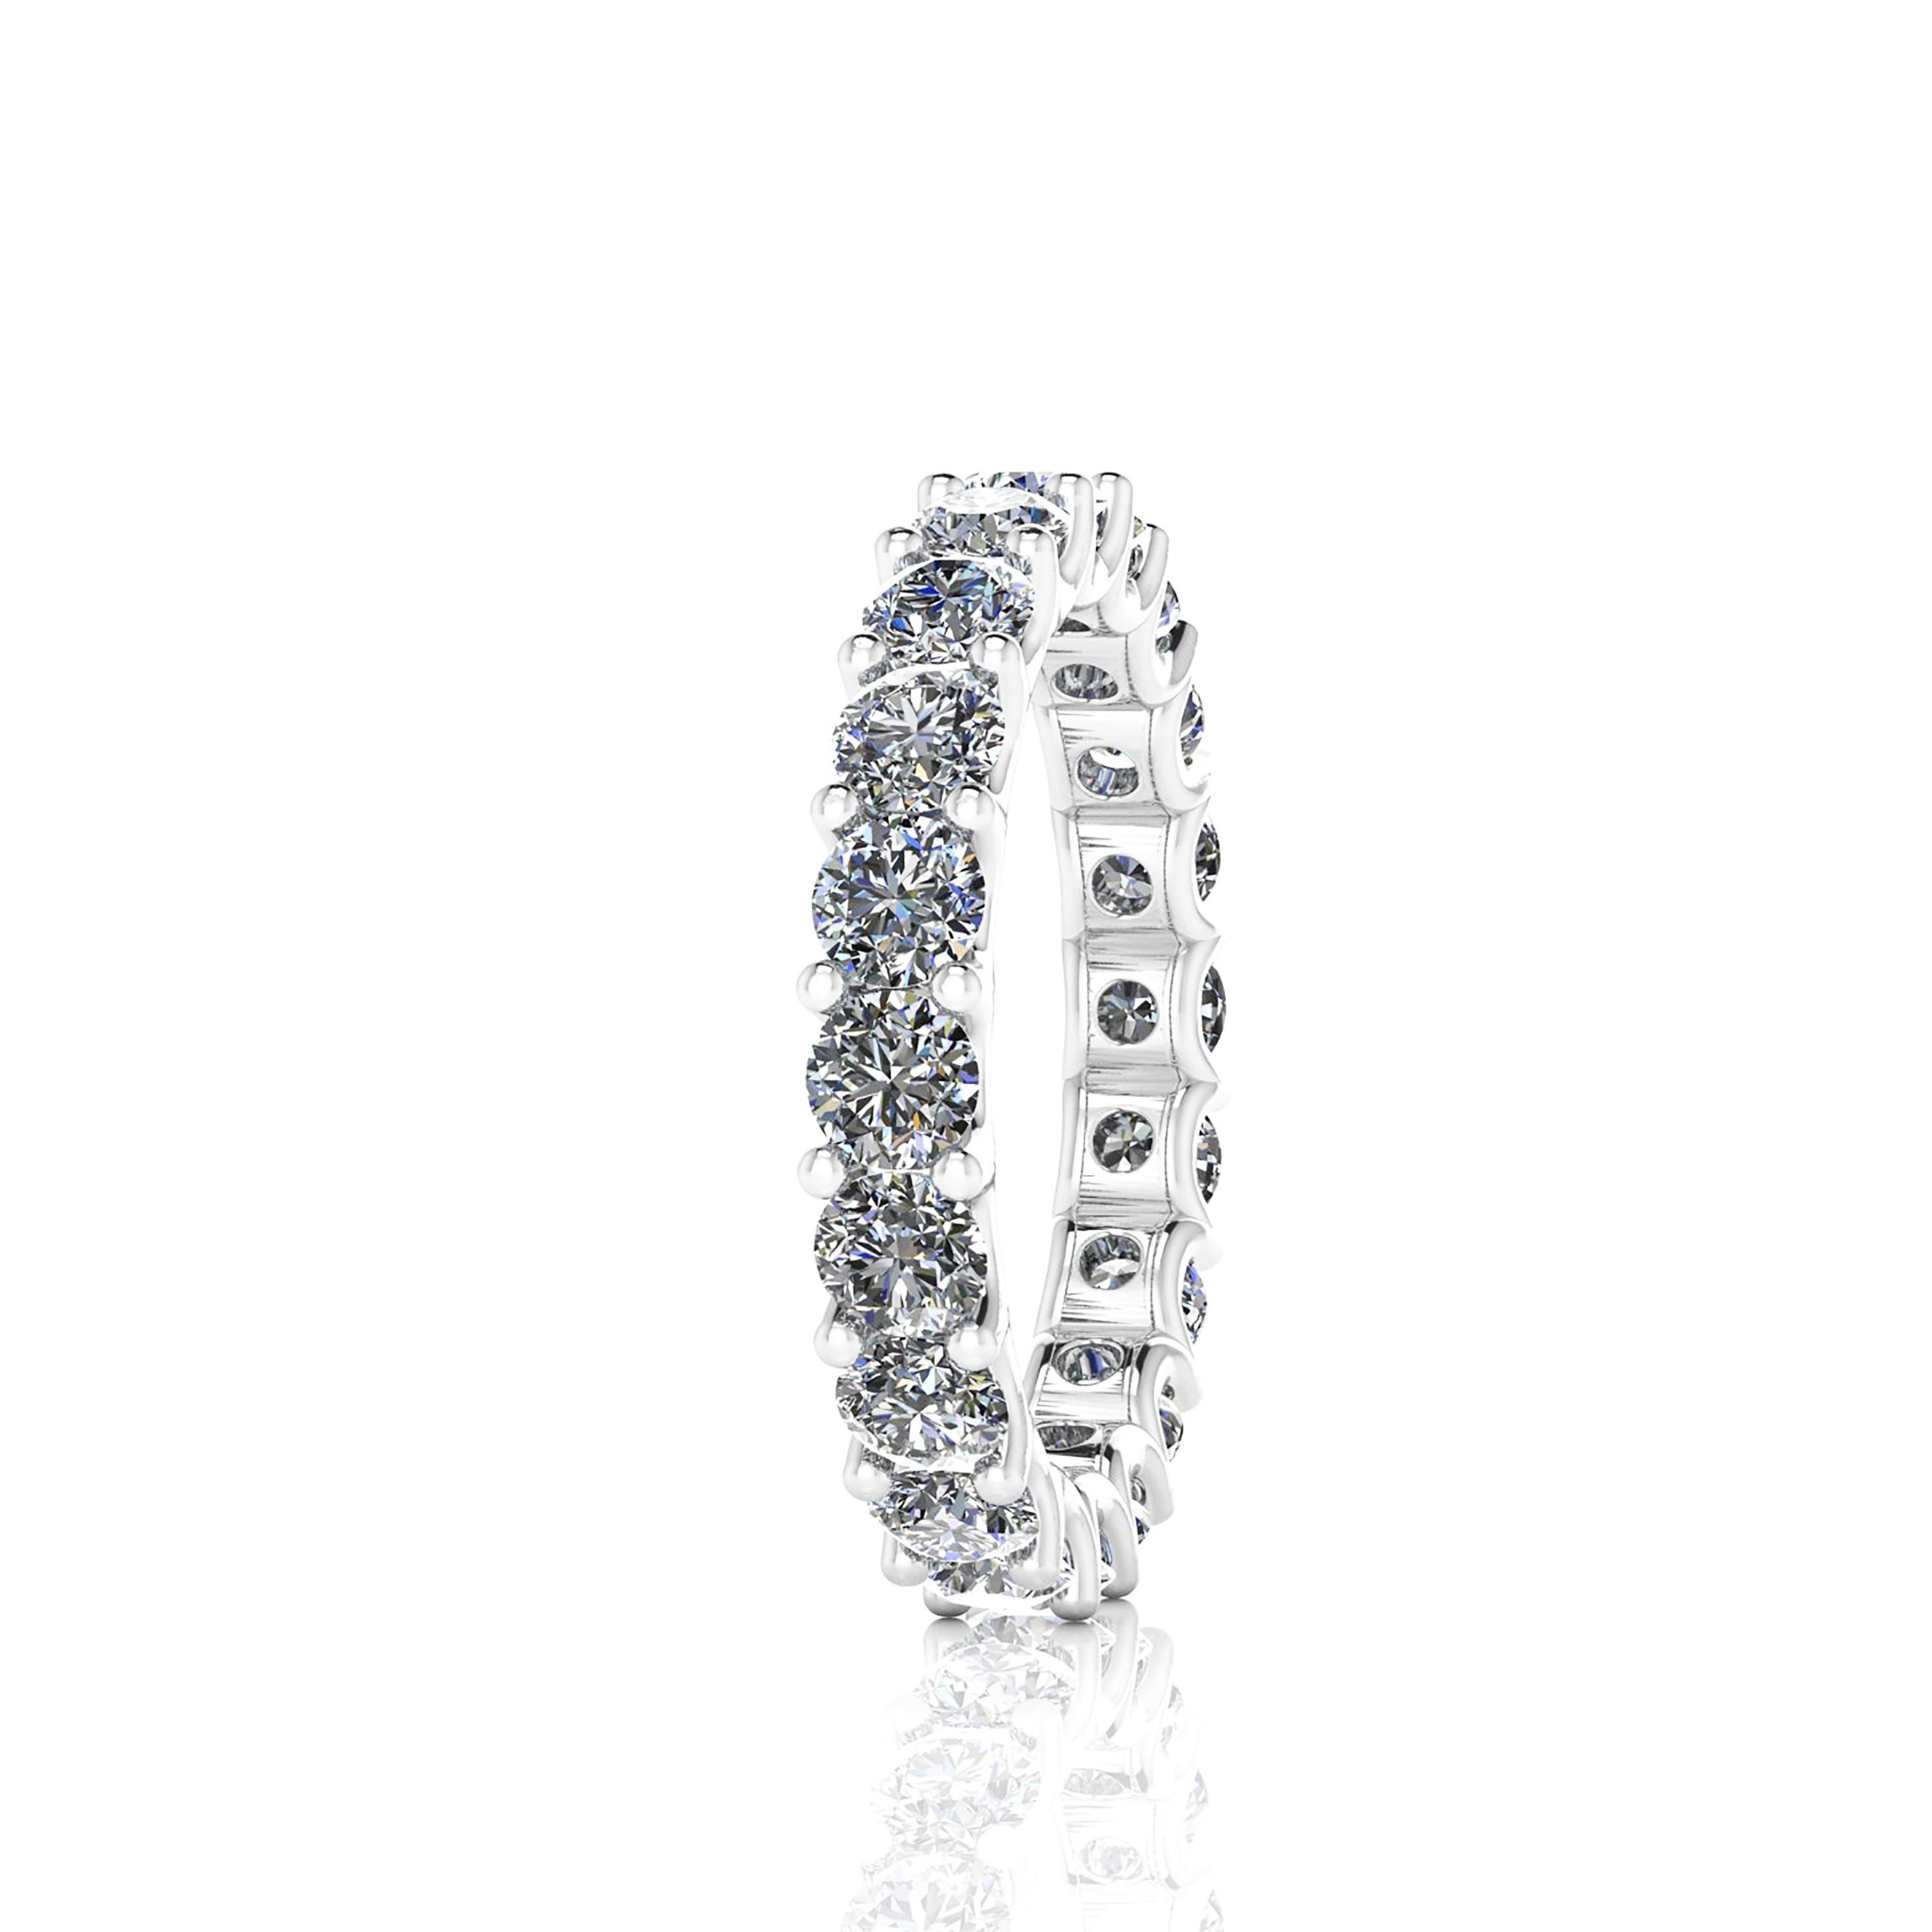 A classic FERRUCCI 2.40 carat of bright white diamonds G/H color, VS/SI1+ clarity, round brilliant shape cuts, set to perfection in a hand crafted, Platinum 950 eternity band, with stackable possibility, made in New York with the best Italian